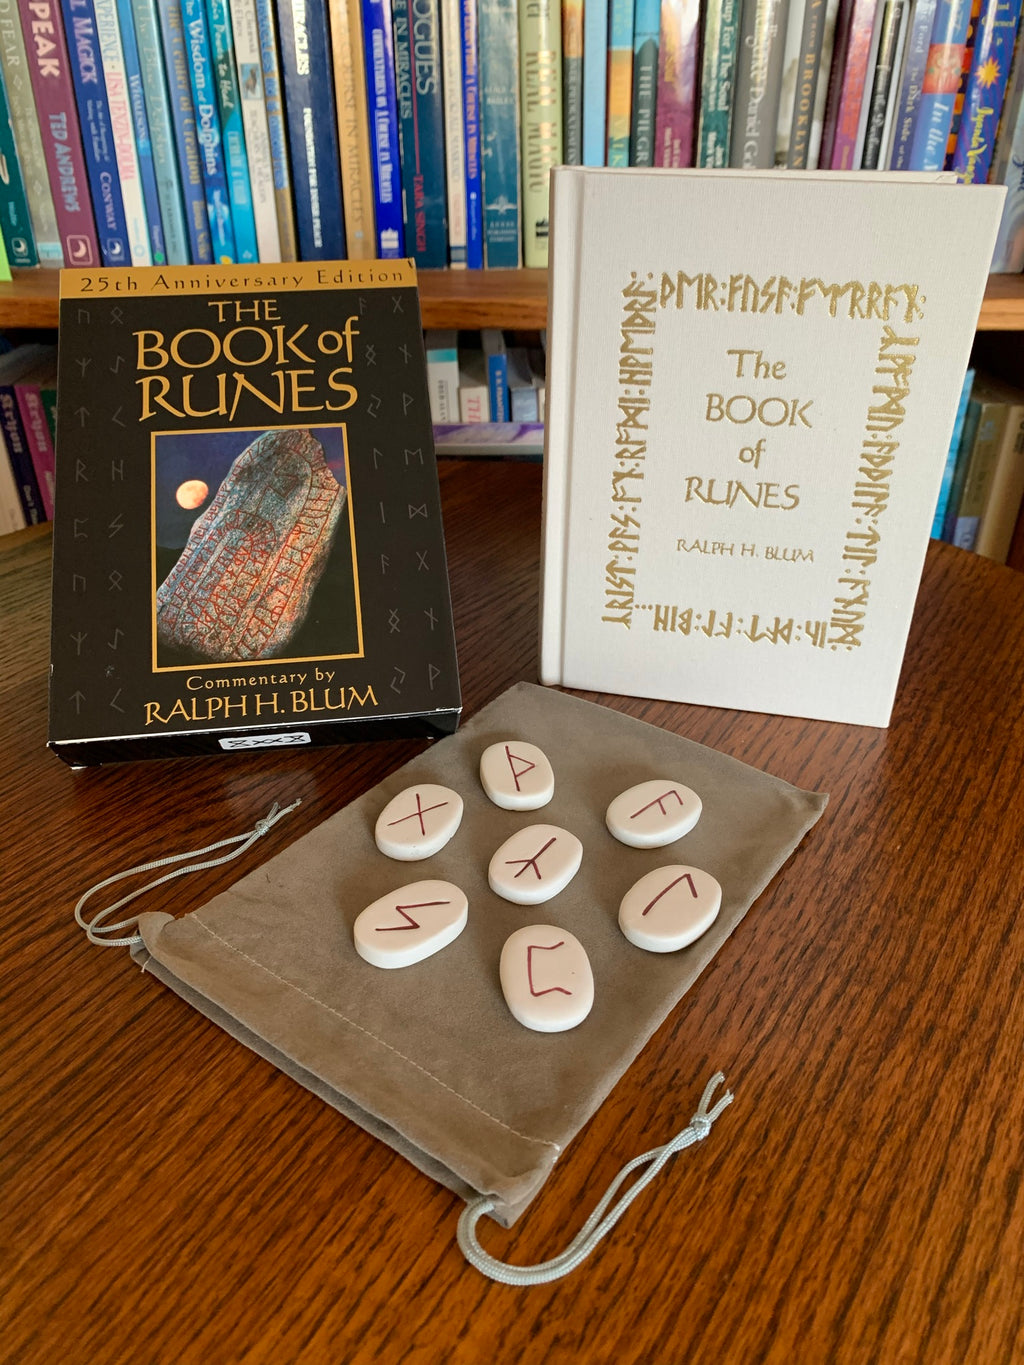 The Book of Runes by Ralph Blum has been around for many years. I have used this set for a very long time. He is the person who is credited (or criticized) for adding the blank rune to the original set of 24, making it 25. The set comes with a set of 25 large rune stones, a bag to store them in and a hardback guidebook. The photo shows the deck box, runes, bag and guidebook. Price is $37.50.